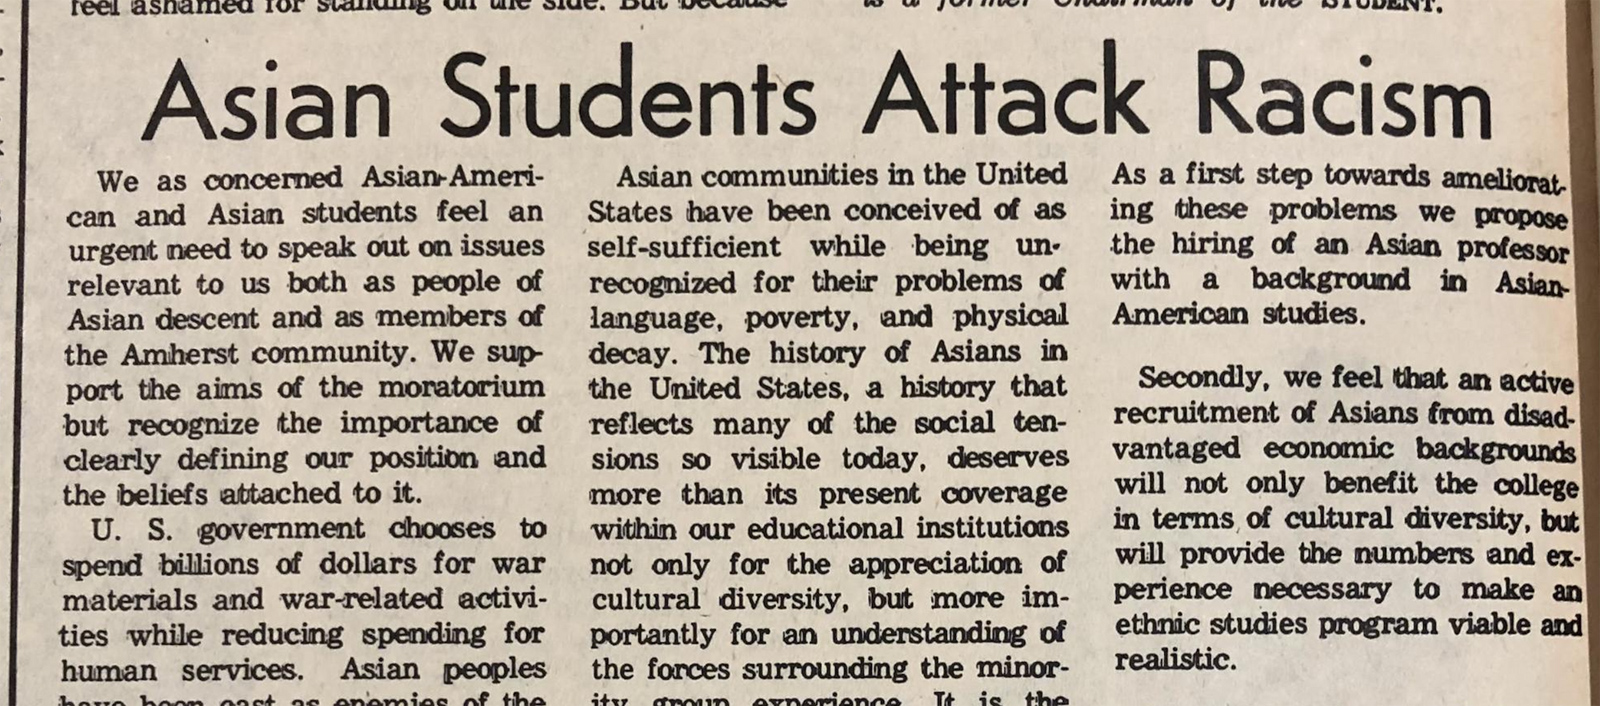 Newspaper headline, Asian Students Attack Racism, from 1972 student newspaper